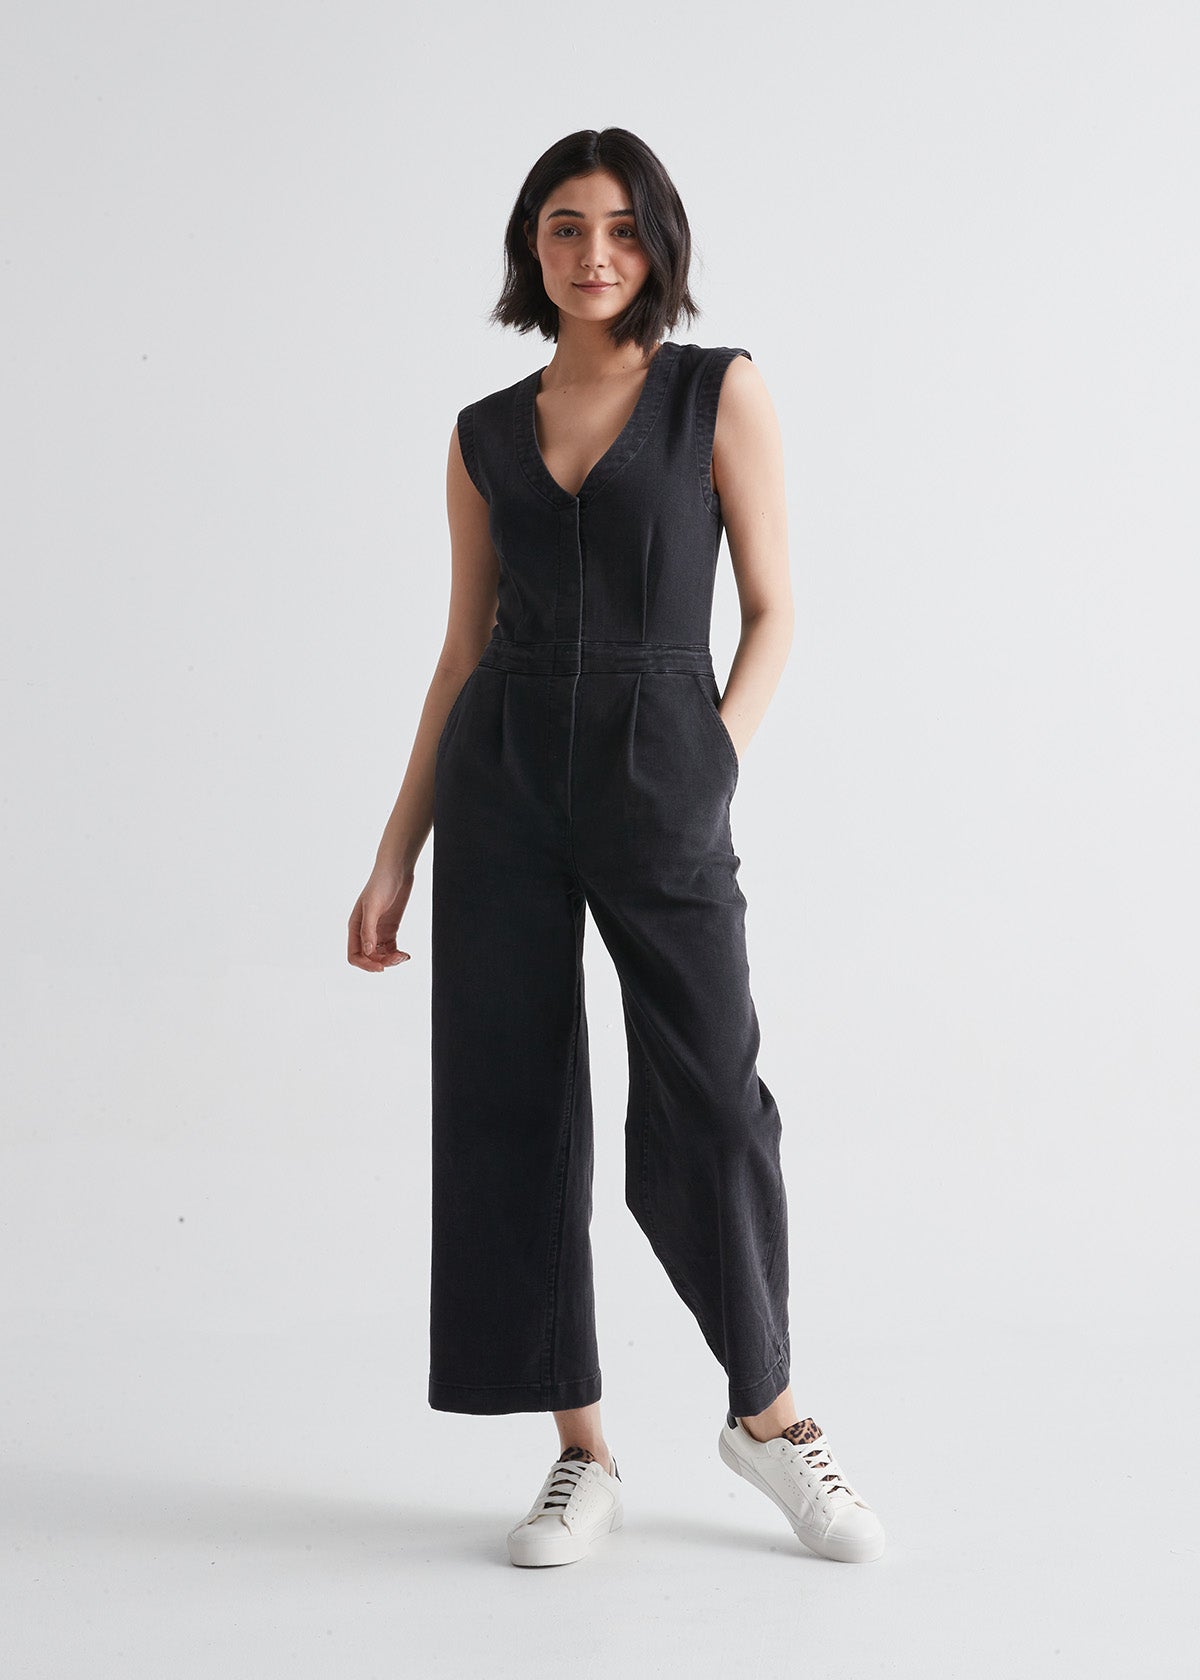 Women's Stretch Denim Tailored Black Jumpsuit Front with Sneakers